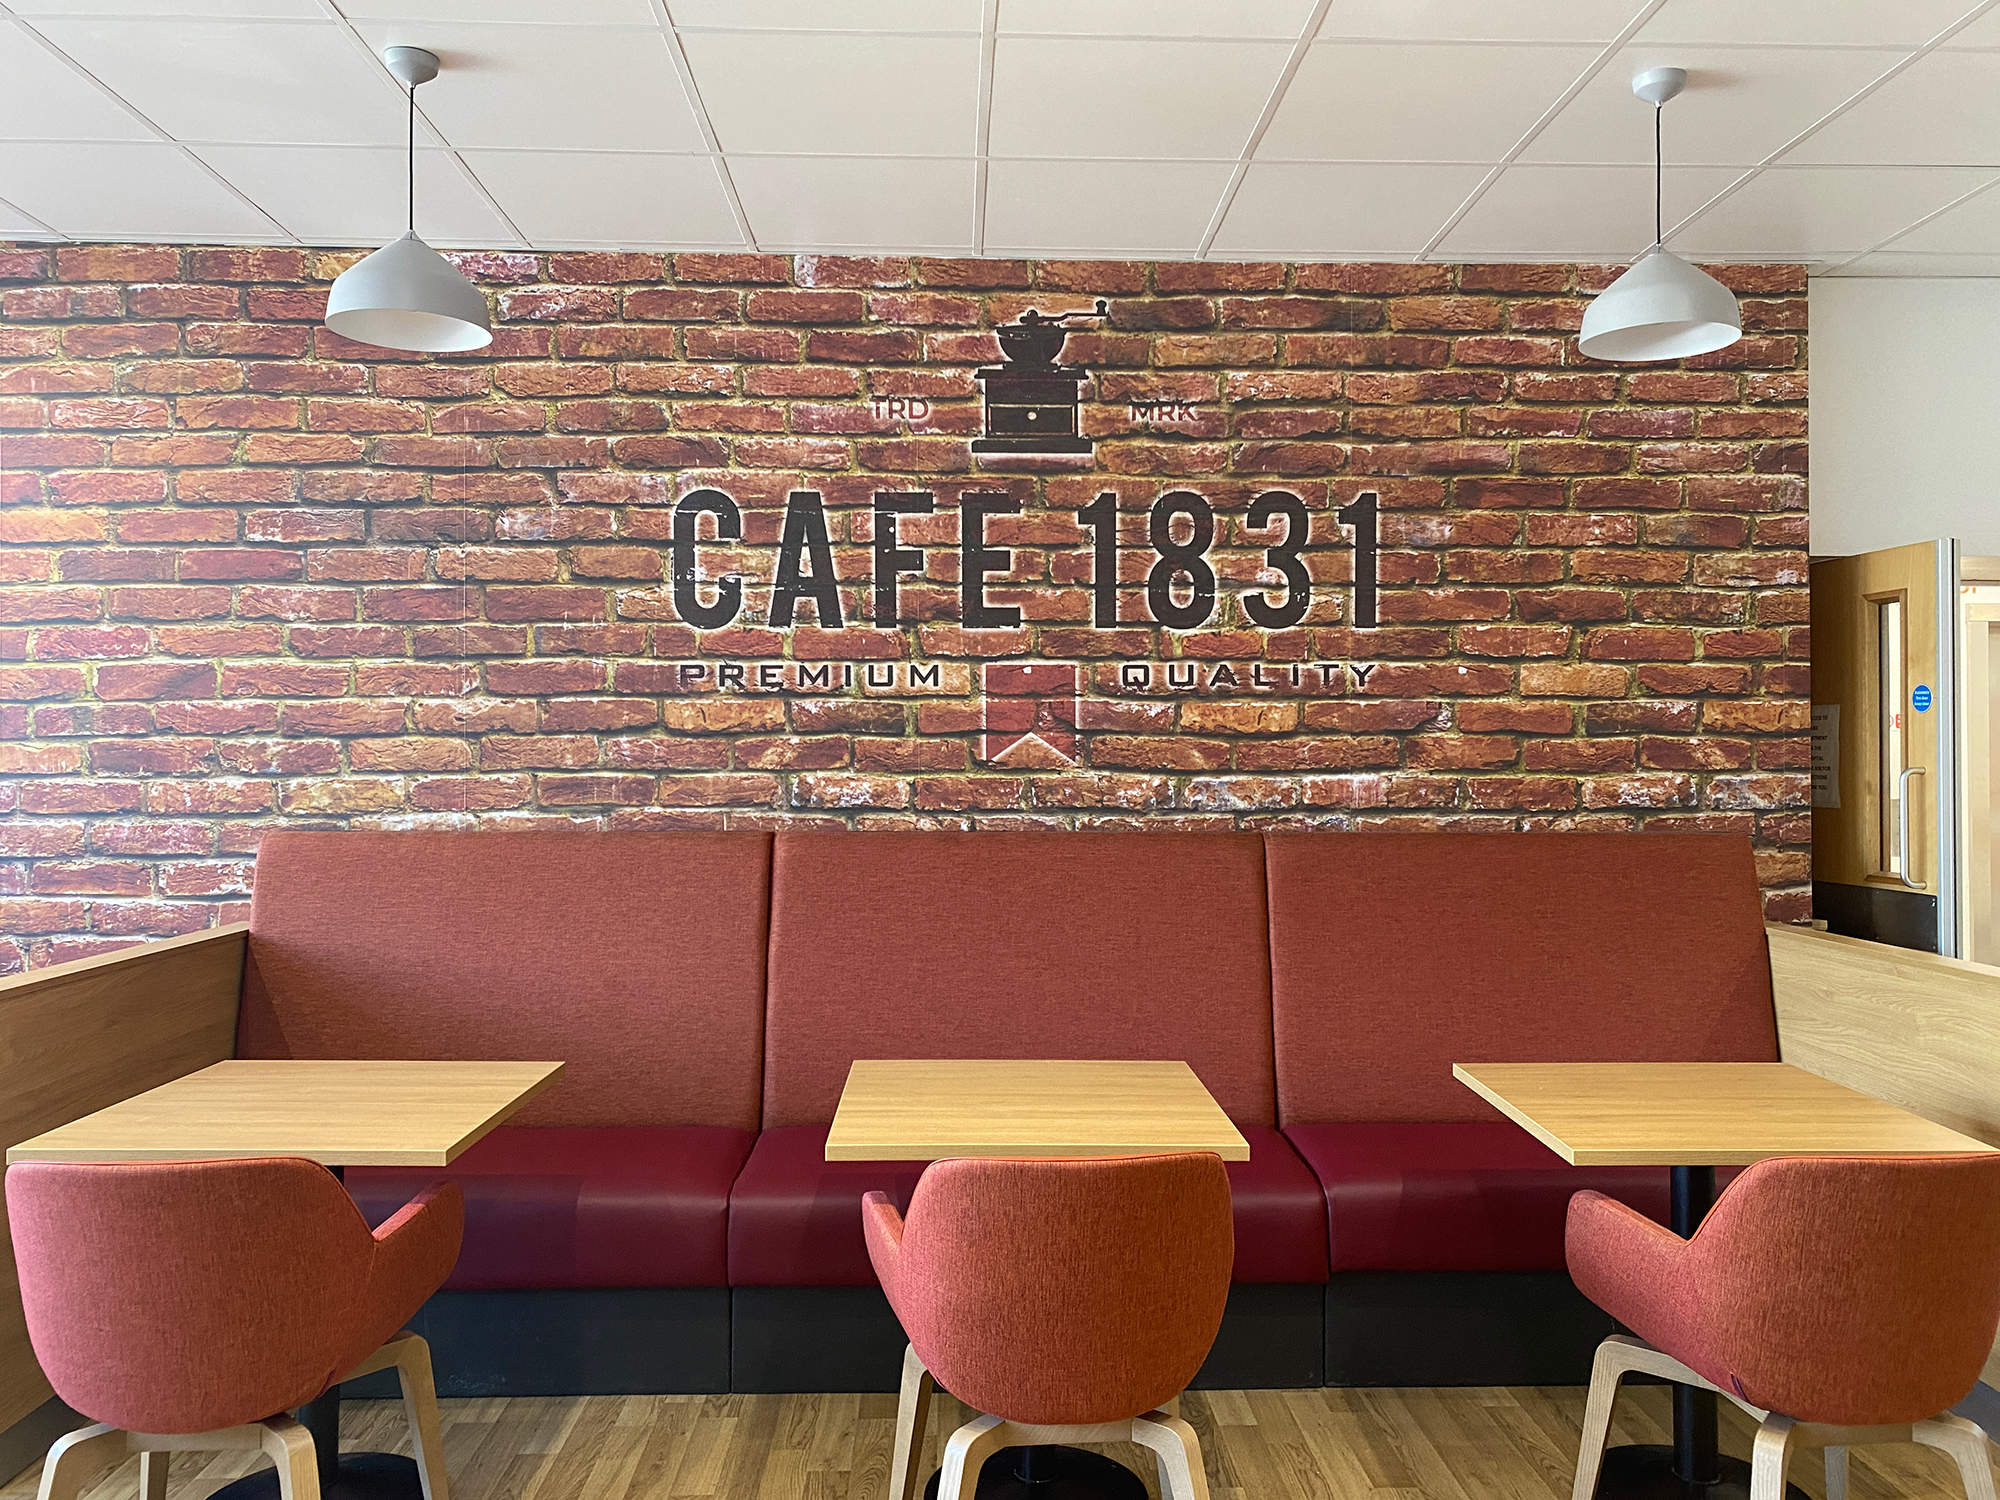 Cafe 1831 seating area with Cafe 1831 Premium Quality on the wall